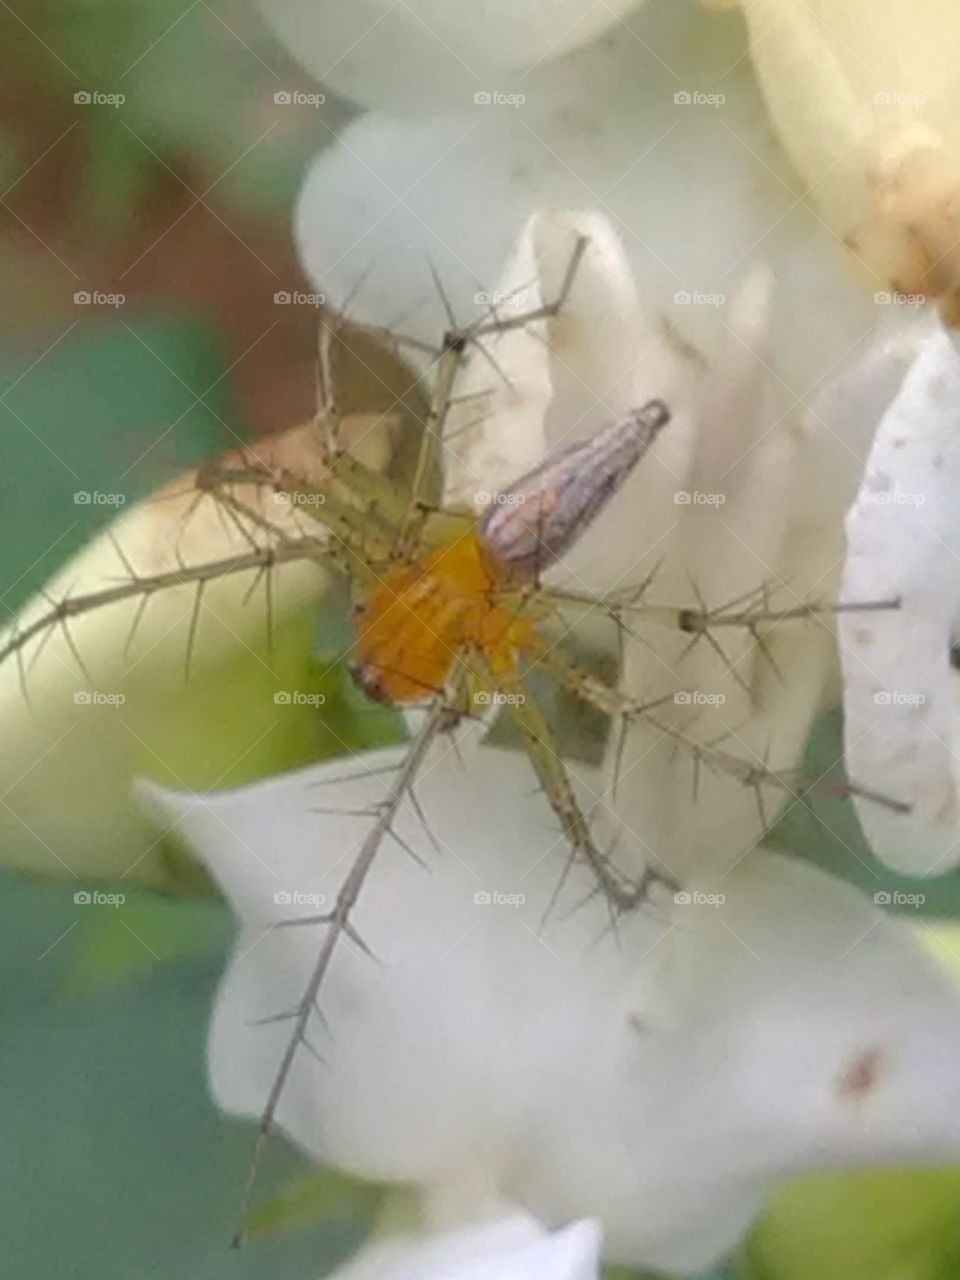 This is a very beautiful and dengars spider mosquitoes spider.